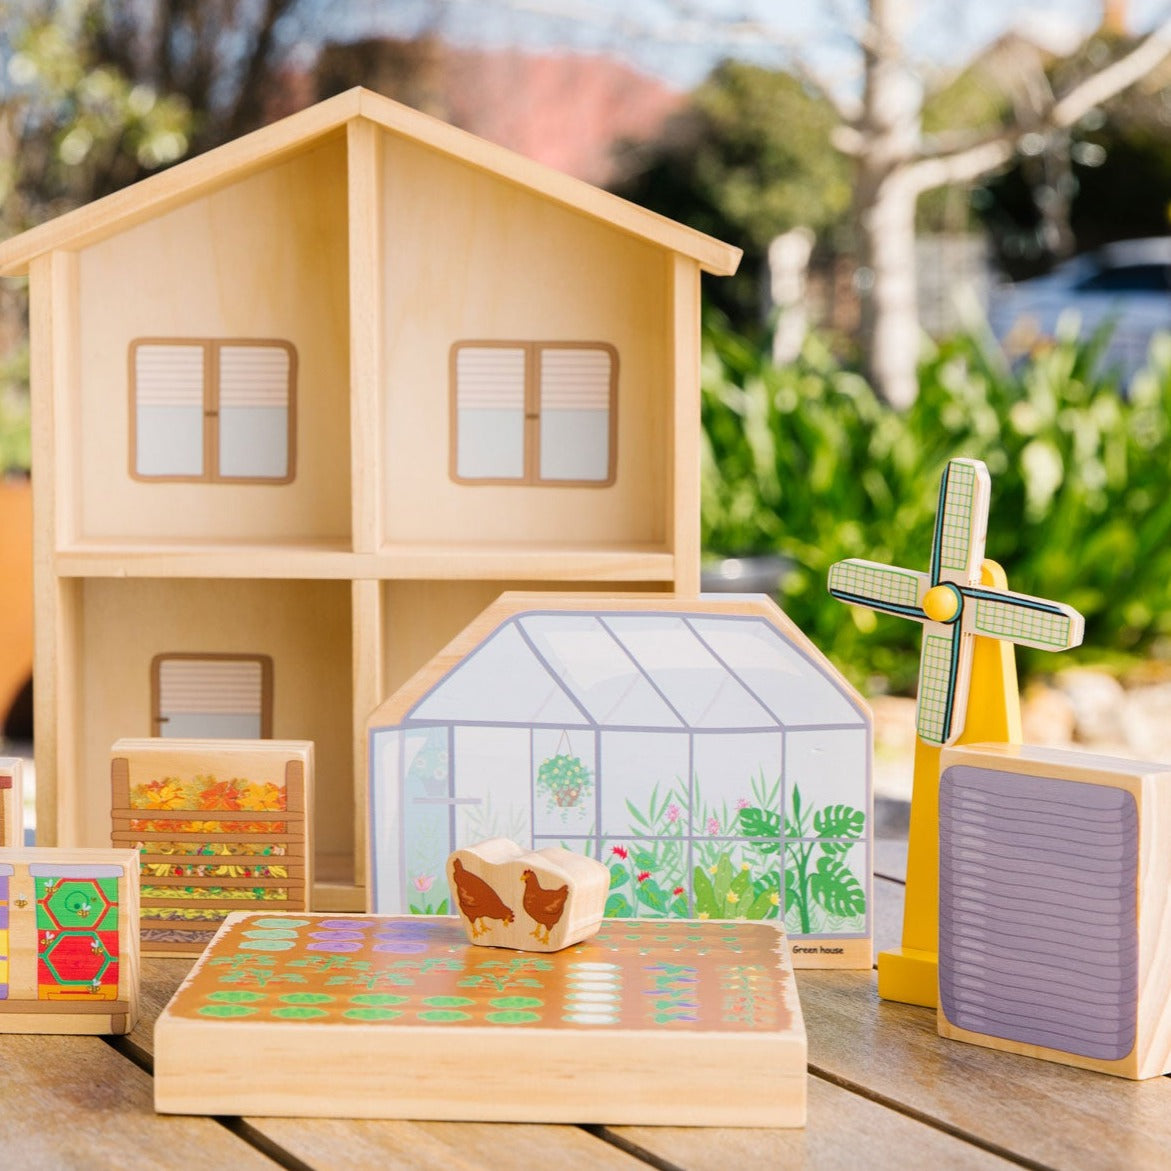 The Eco House, This sustainable living playset is perfect for children who are interested in learning about sustainable living in a fun and interactive way. With solar panels, solar hot water, a vegetable garden, chicken coop, windmill and compost bin, children can learn all about eco-friendly living. This playset encourages discussions about environmental outcomes and the importance of making good environmental decisions. Crafted from sustainably sourced New Zealand pine and plywood, this playset is both e